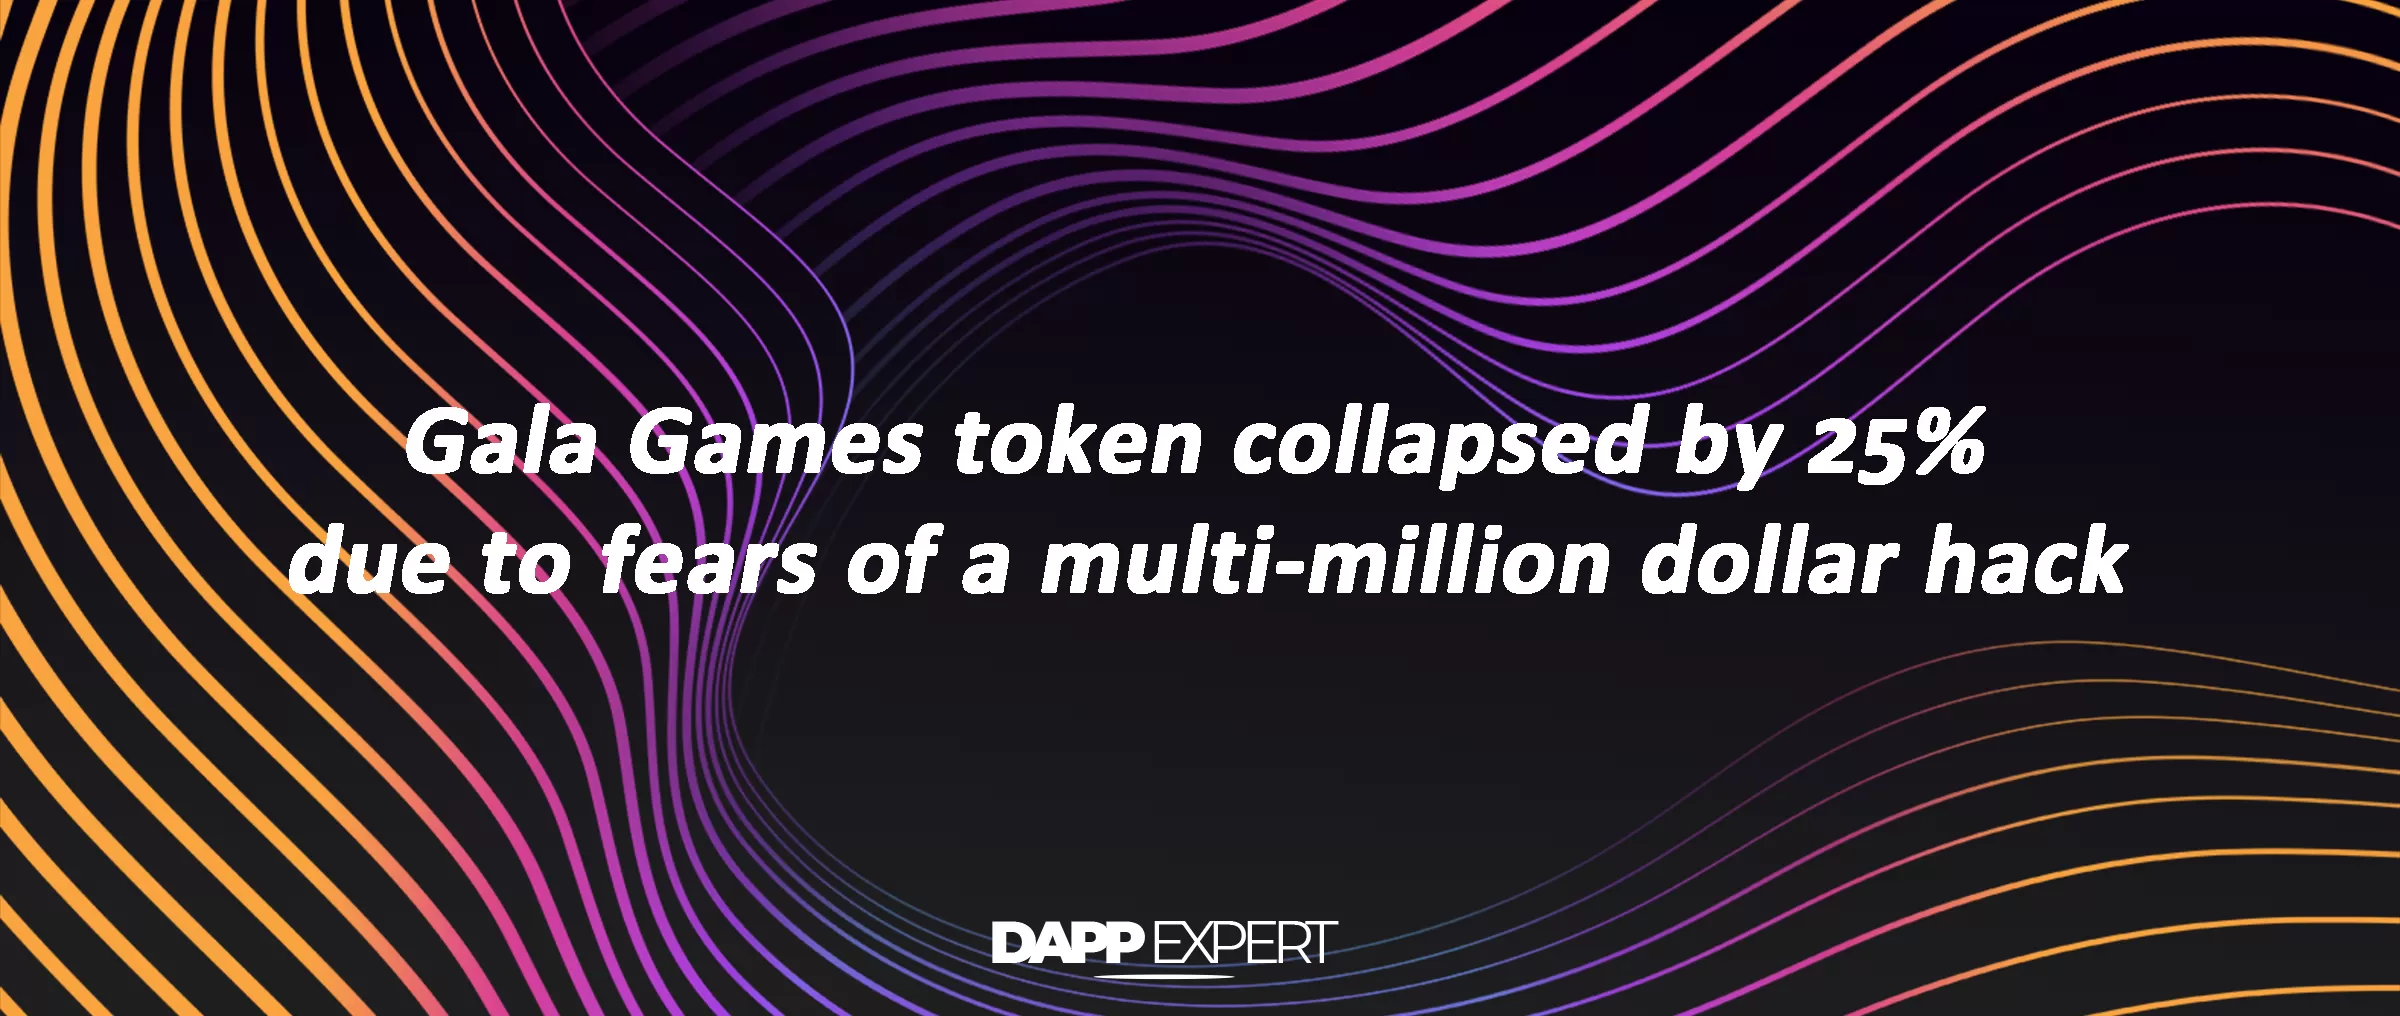 Gala Games token collapsed by 25% due to fears of a multi-million dollar hack